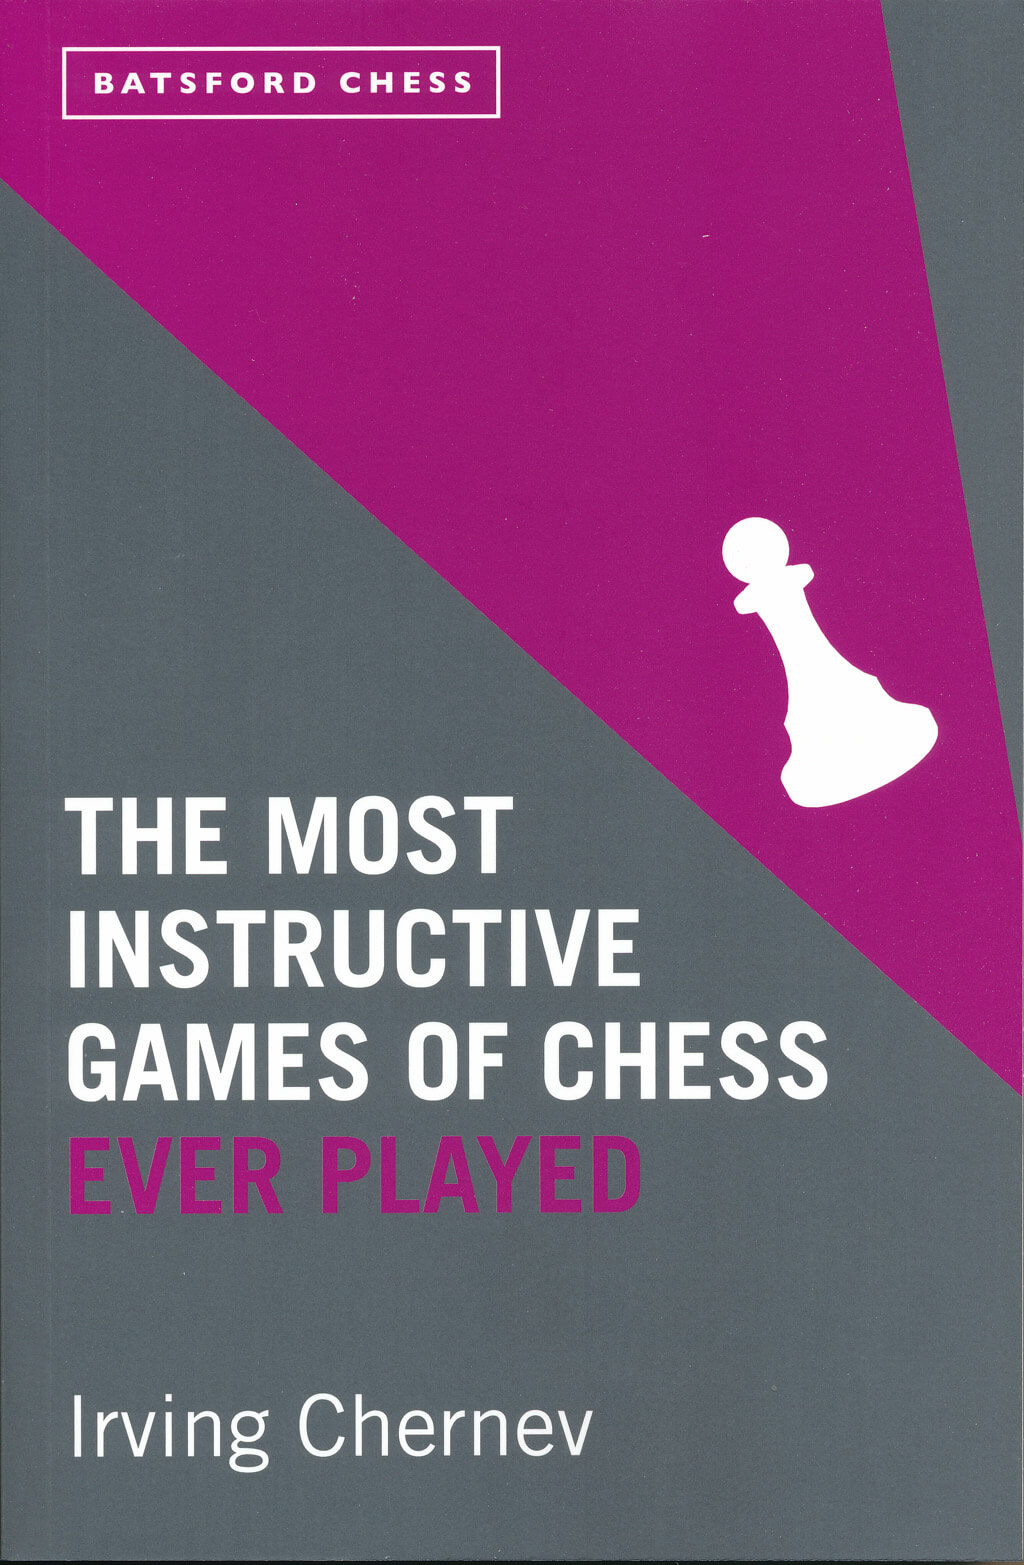 The Most Instructive Games of Chess Ever Played (Paperback) - image 2 of 2